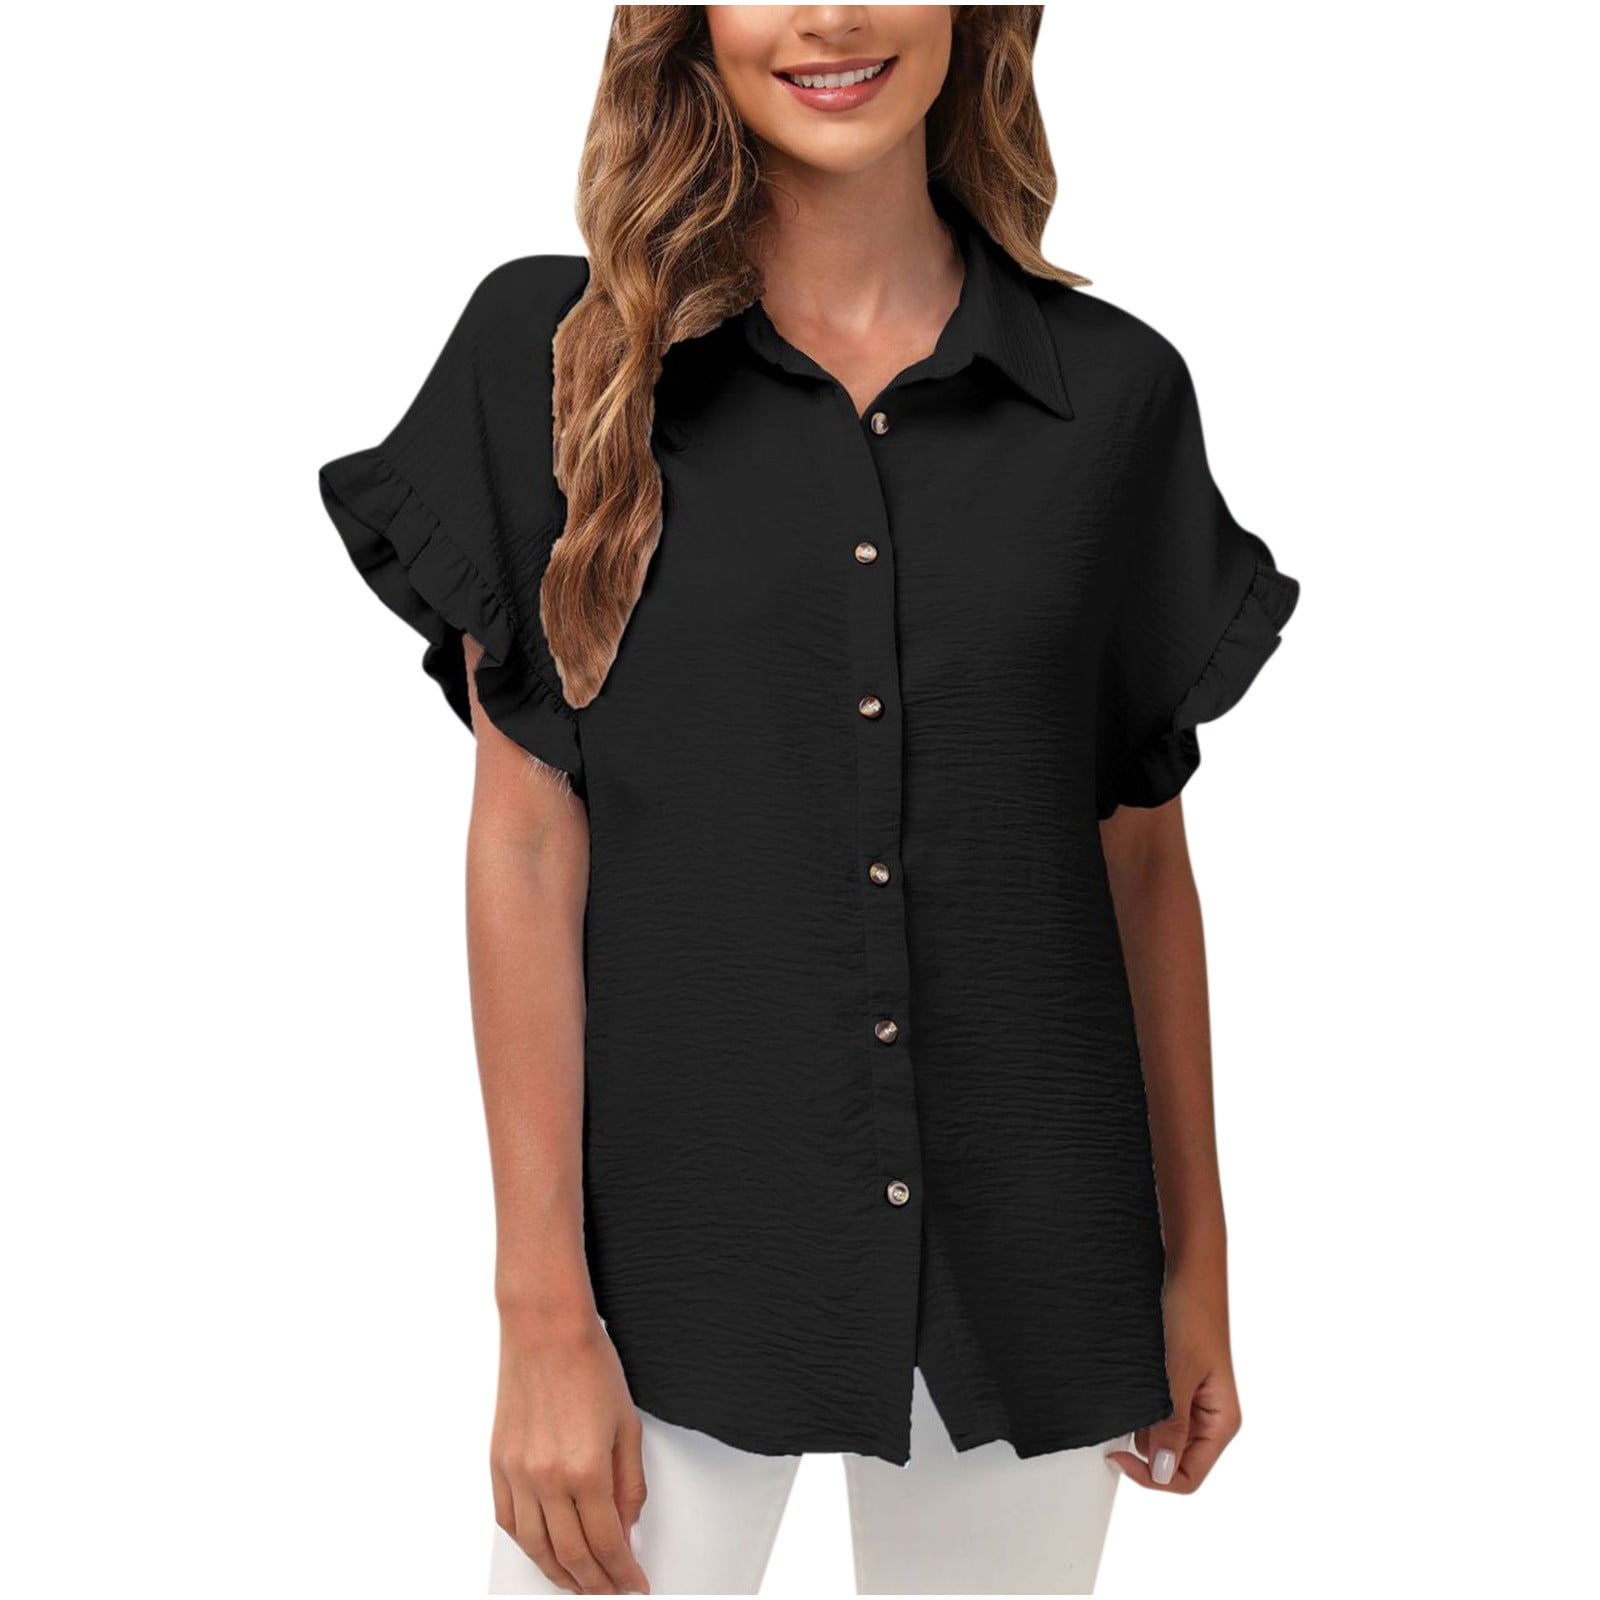 Womens Short Sleeve Button Neck,Under 15 Dollar Items,pallets of Returned  Items for Sale,Deals on,Women, Deal for The Day,hot Deals B-Black at   Women's Clothing store